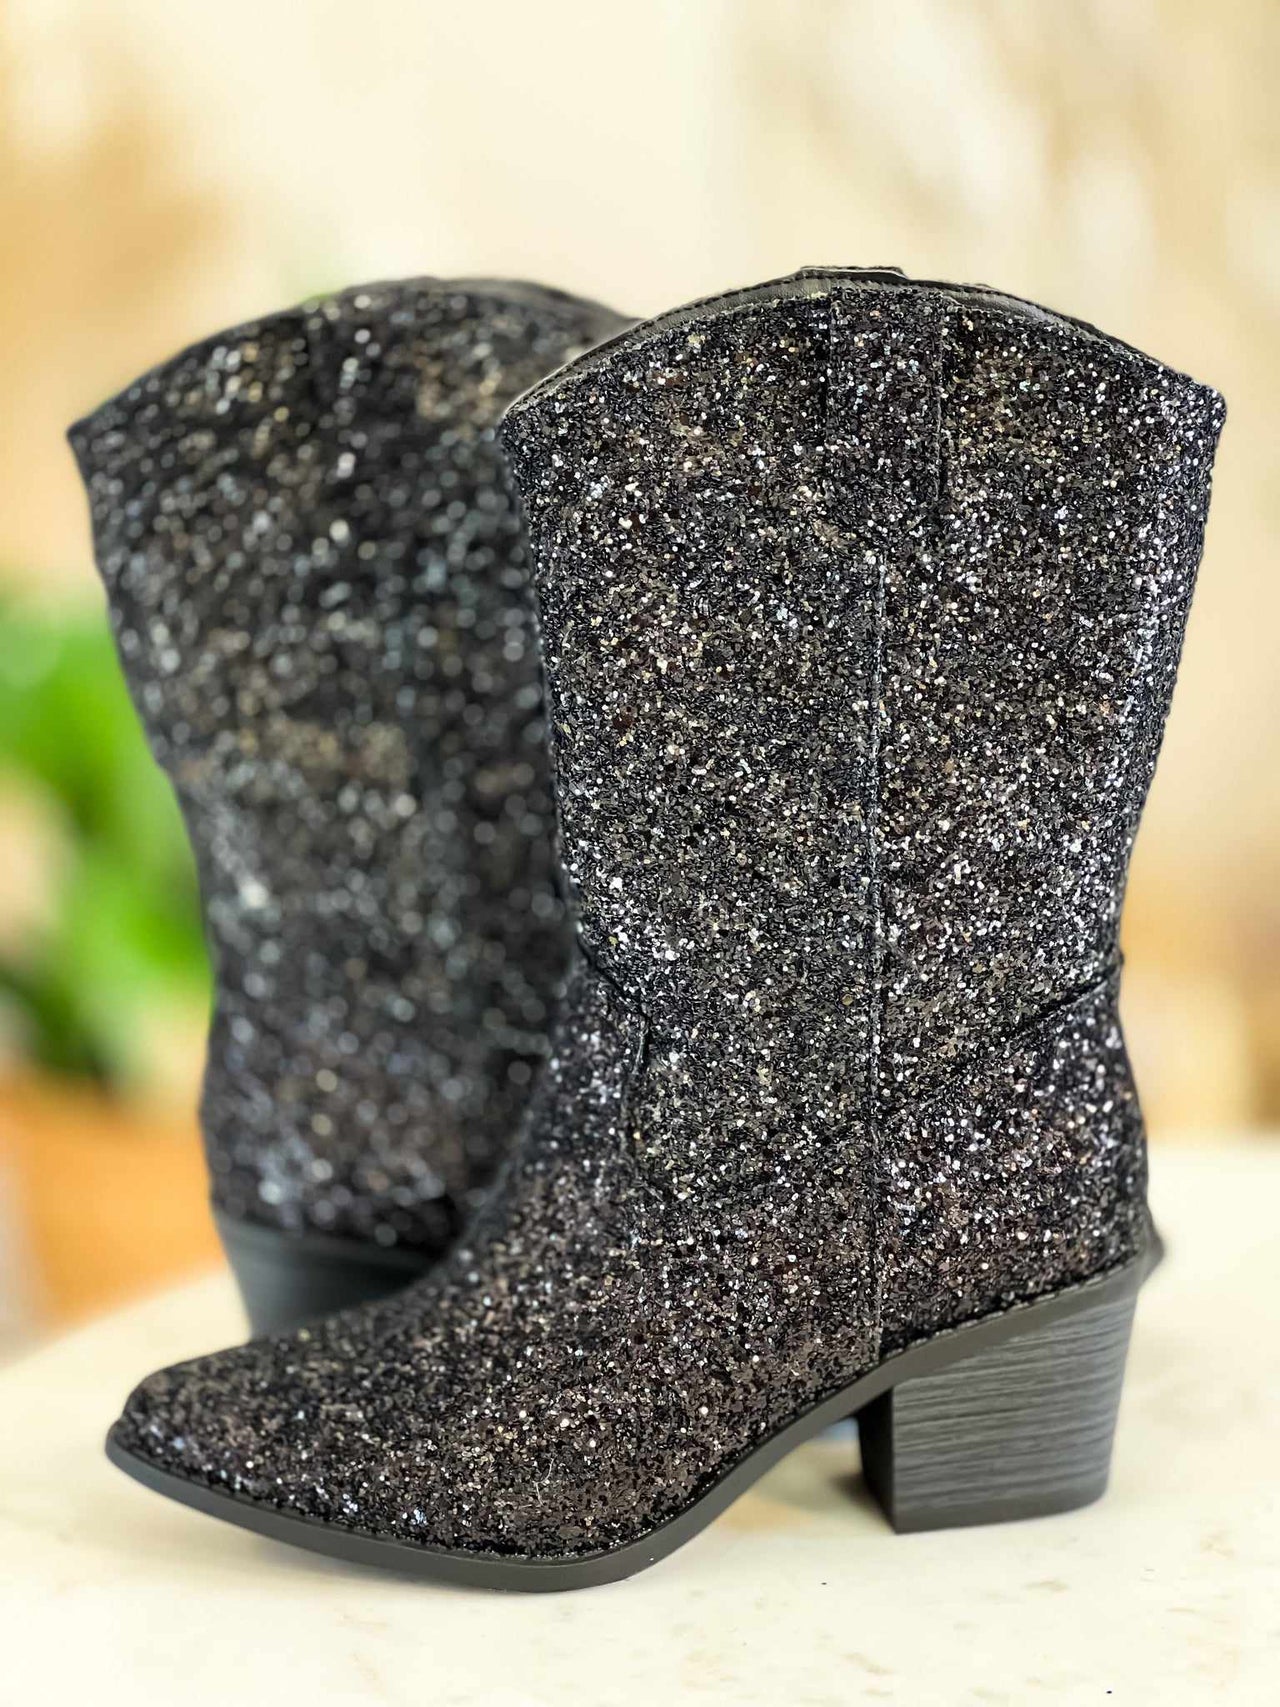 Short black boots with glitter